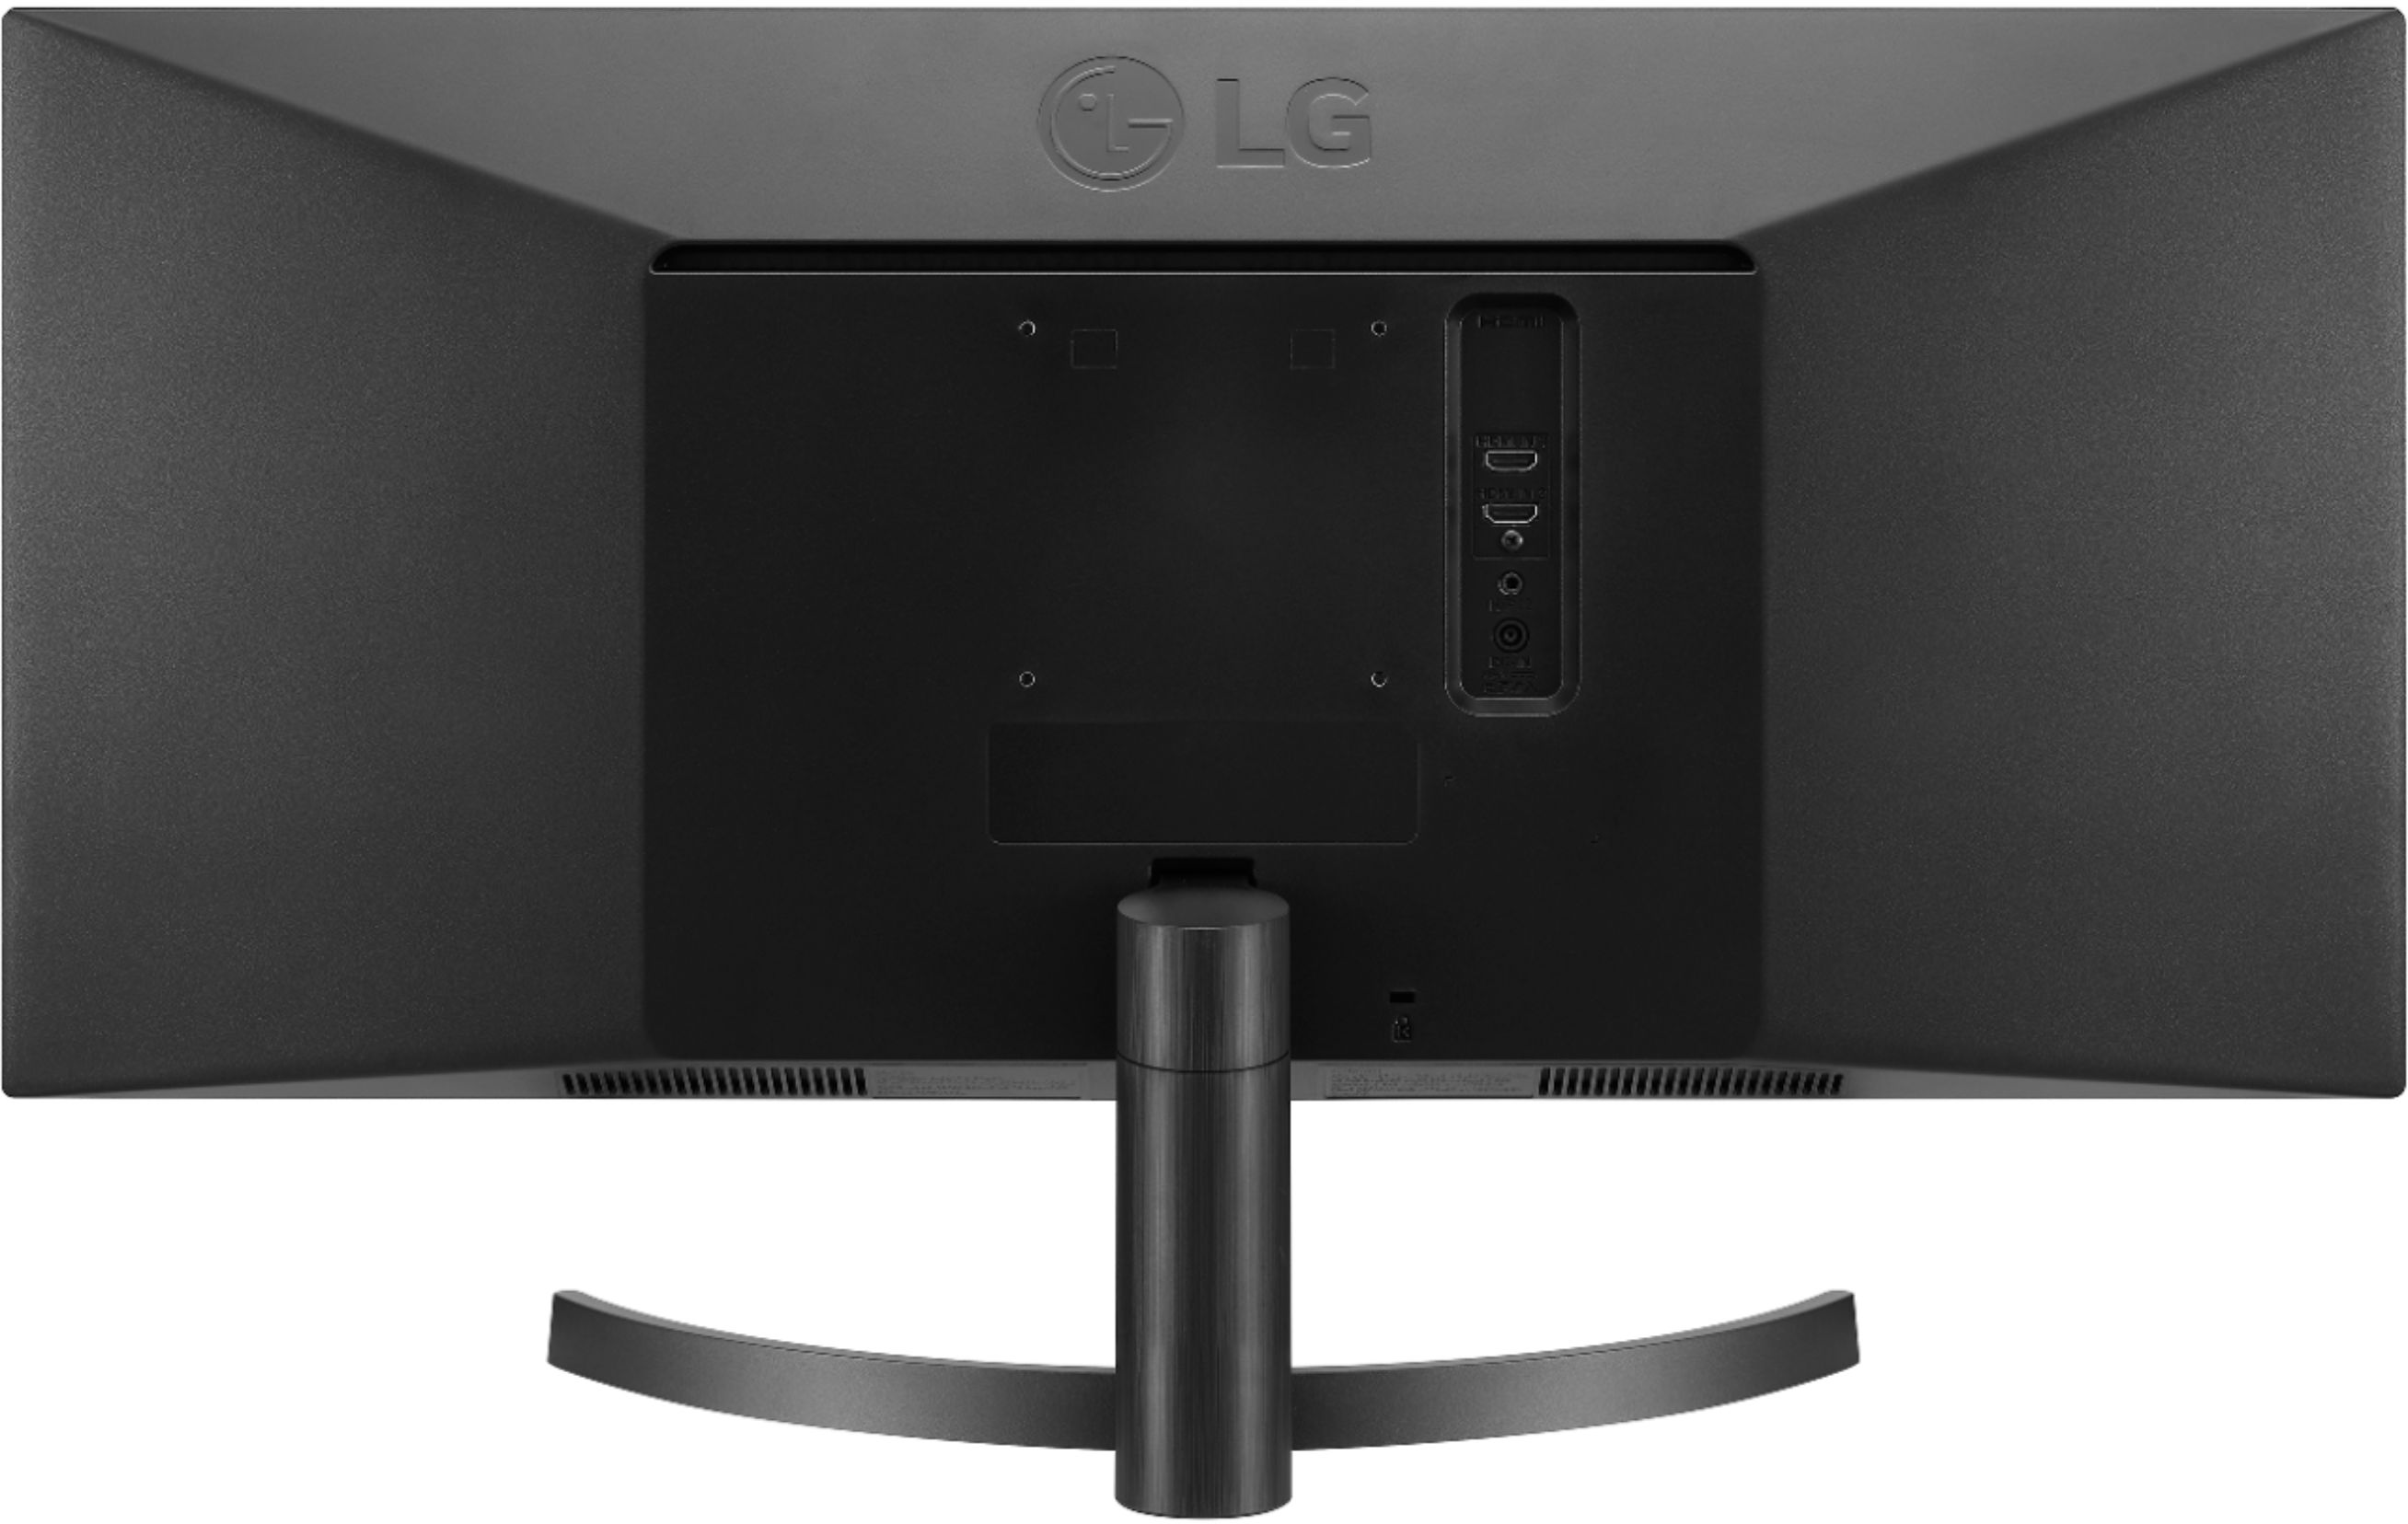 Back View: LG - Geek Squad Certified Refurbished 29WL500-B 29" IPS LED UltraWide FHD FreeSync Monitor with HDR - Black